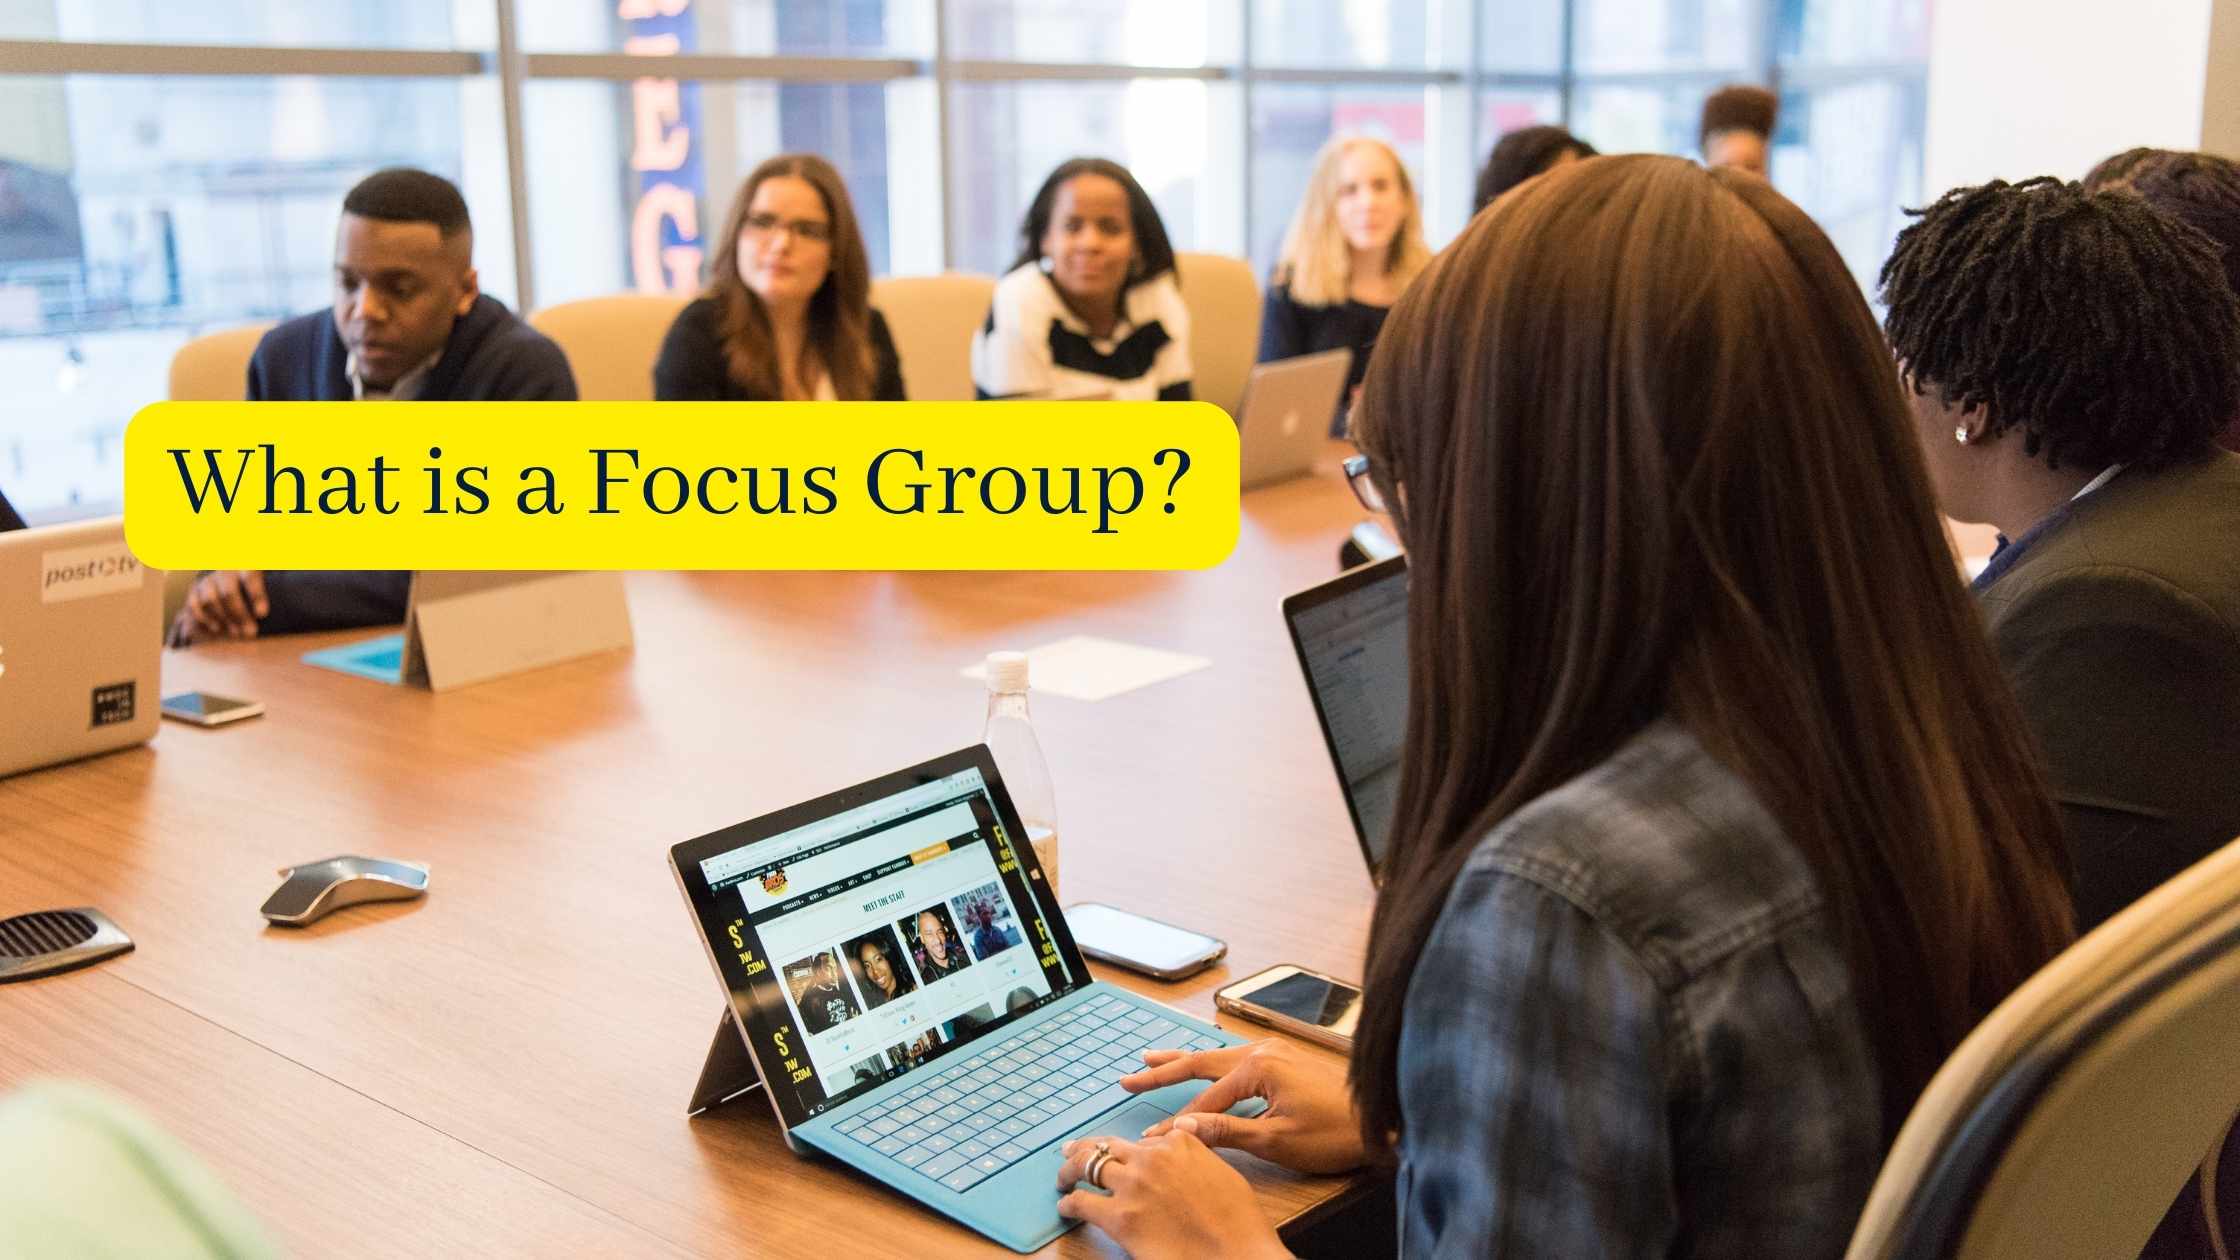 A Focus Group is an organized discussion supervised by a trained moderator (trained facilitator).